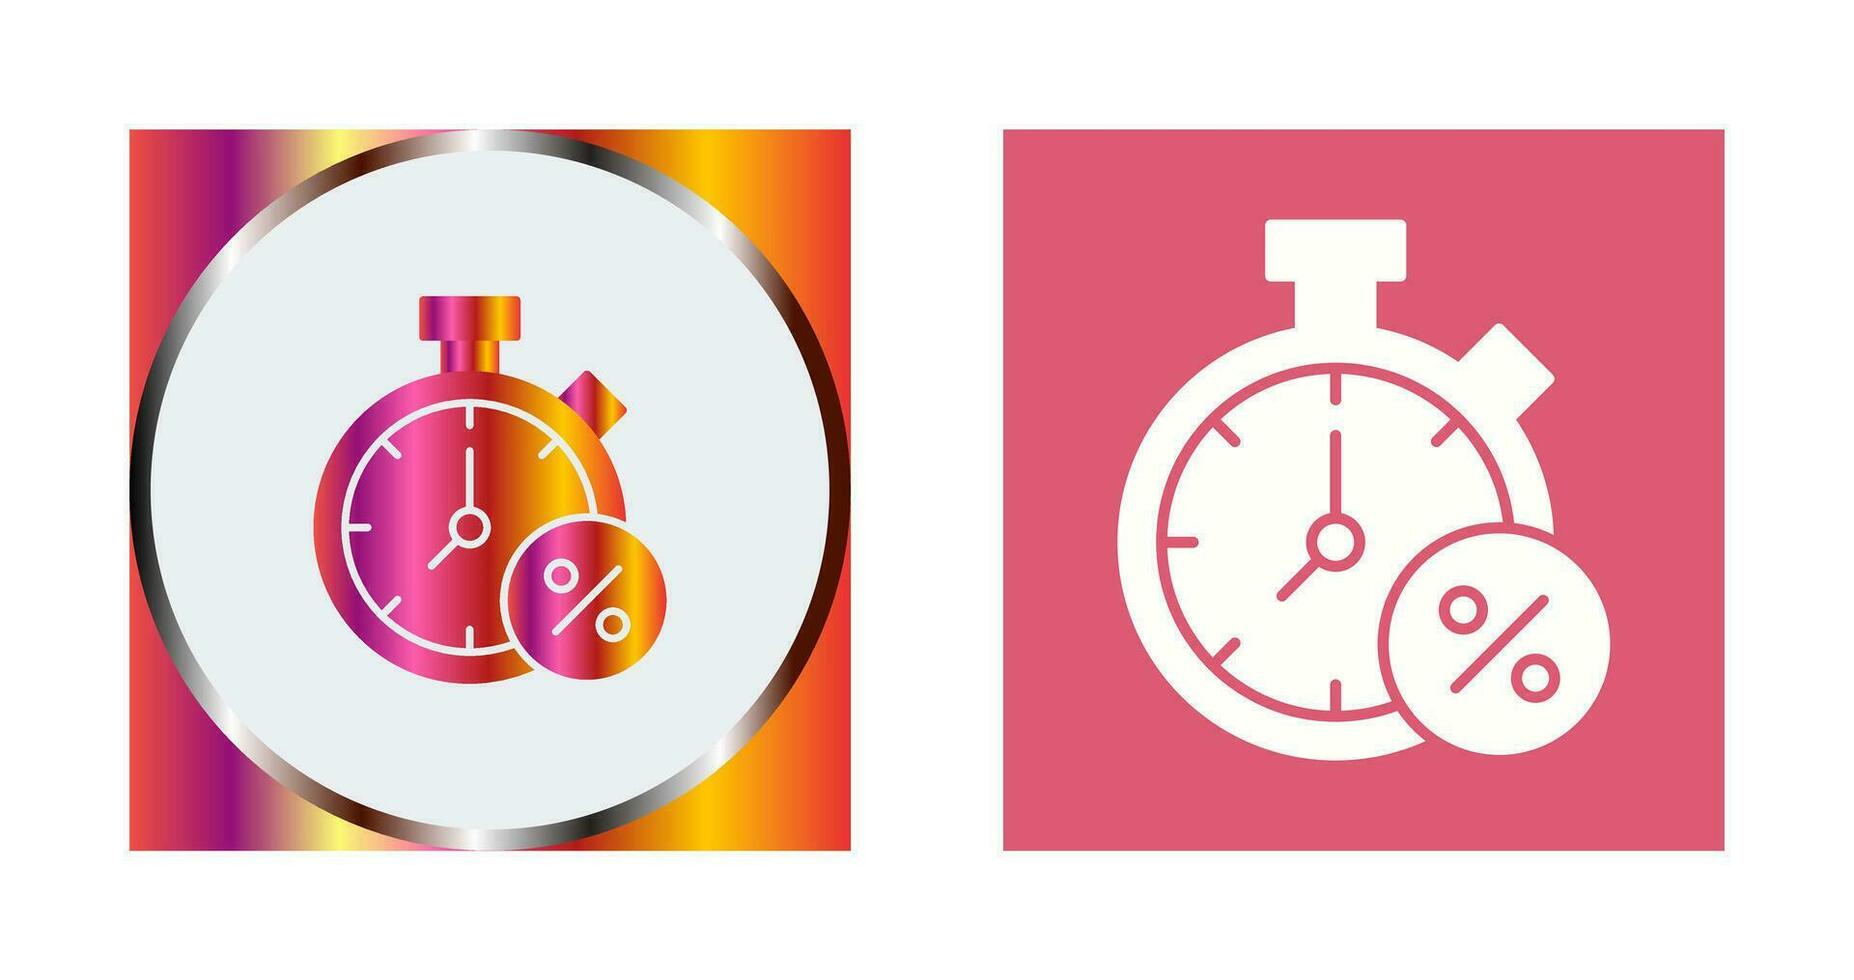 timer vector icoon